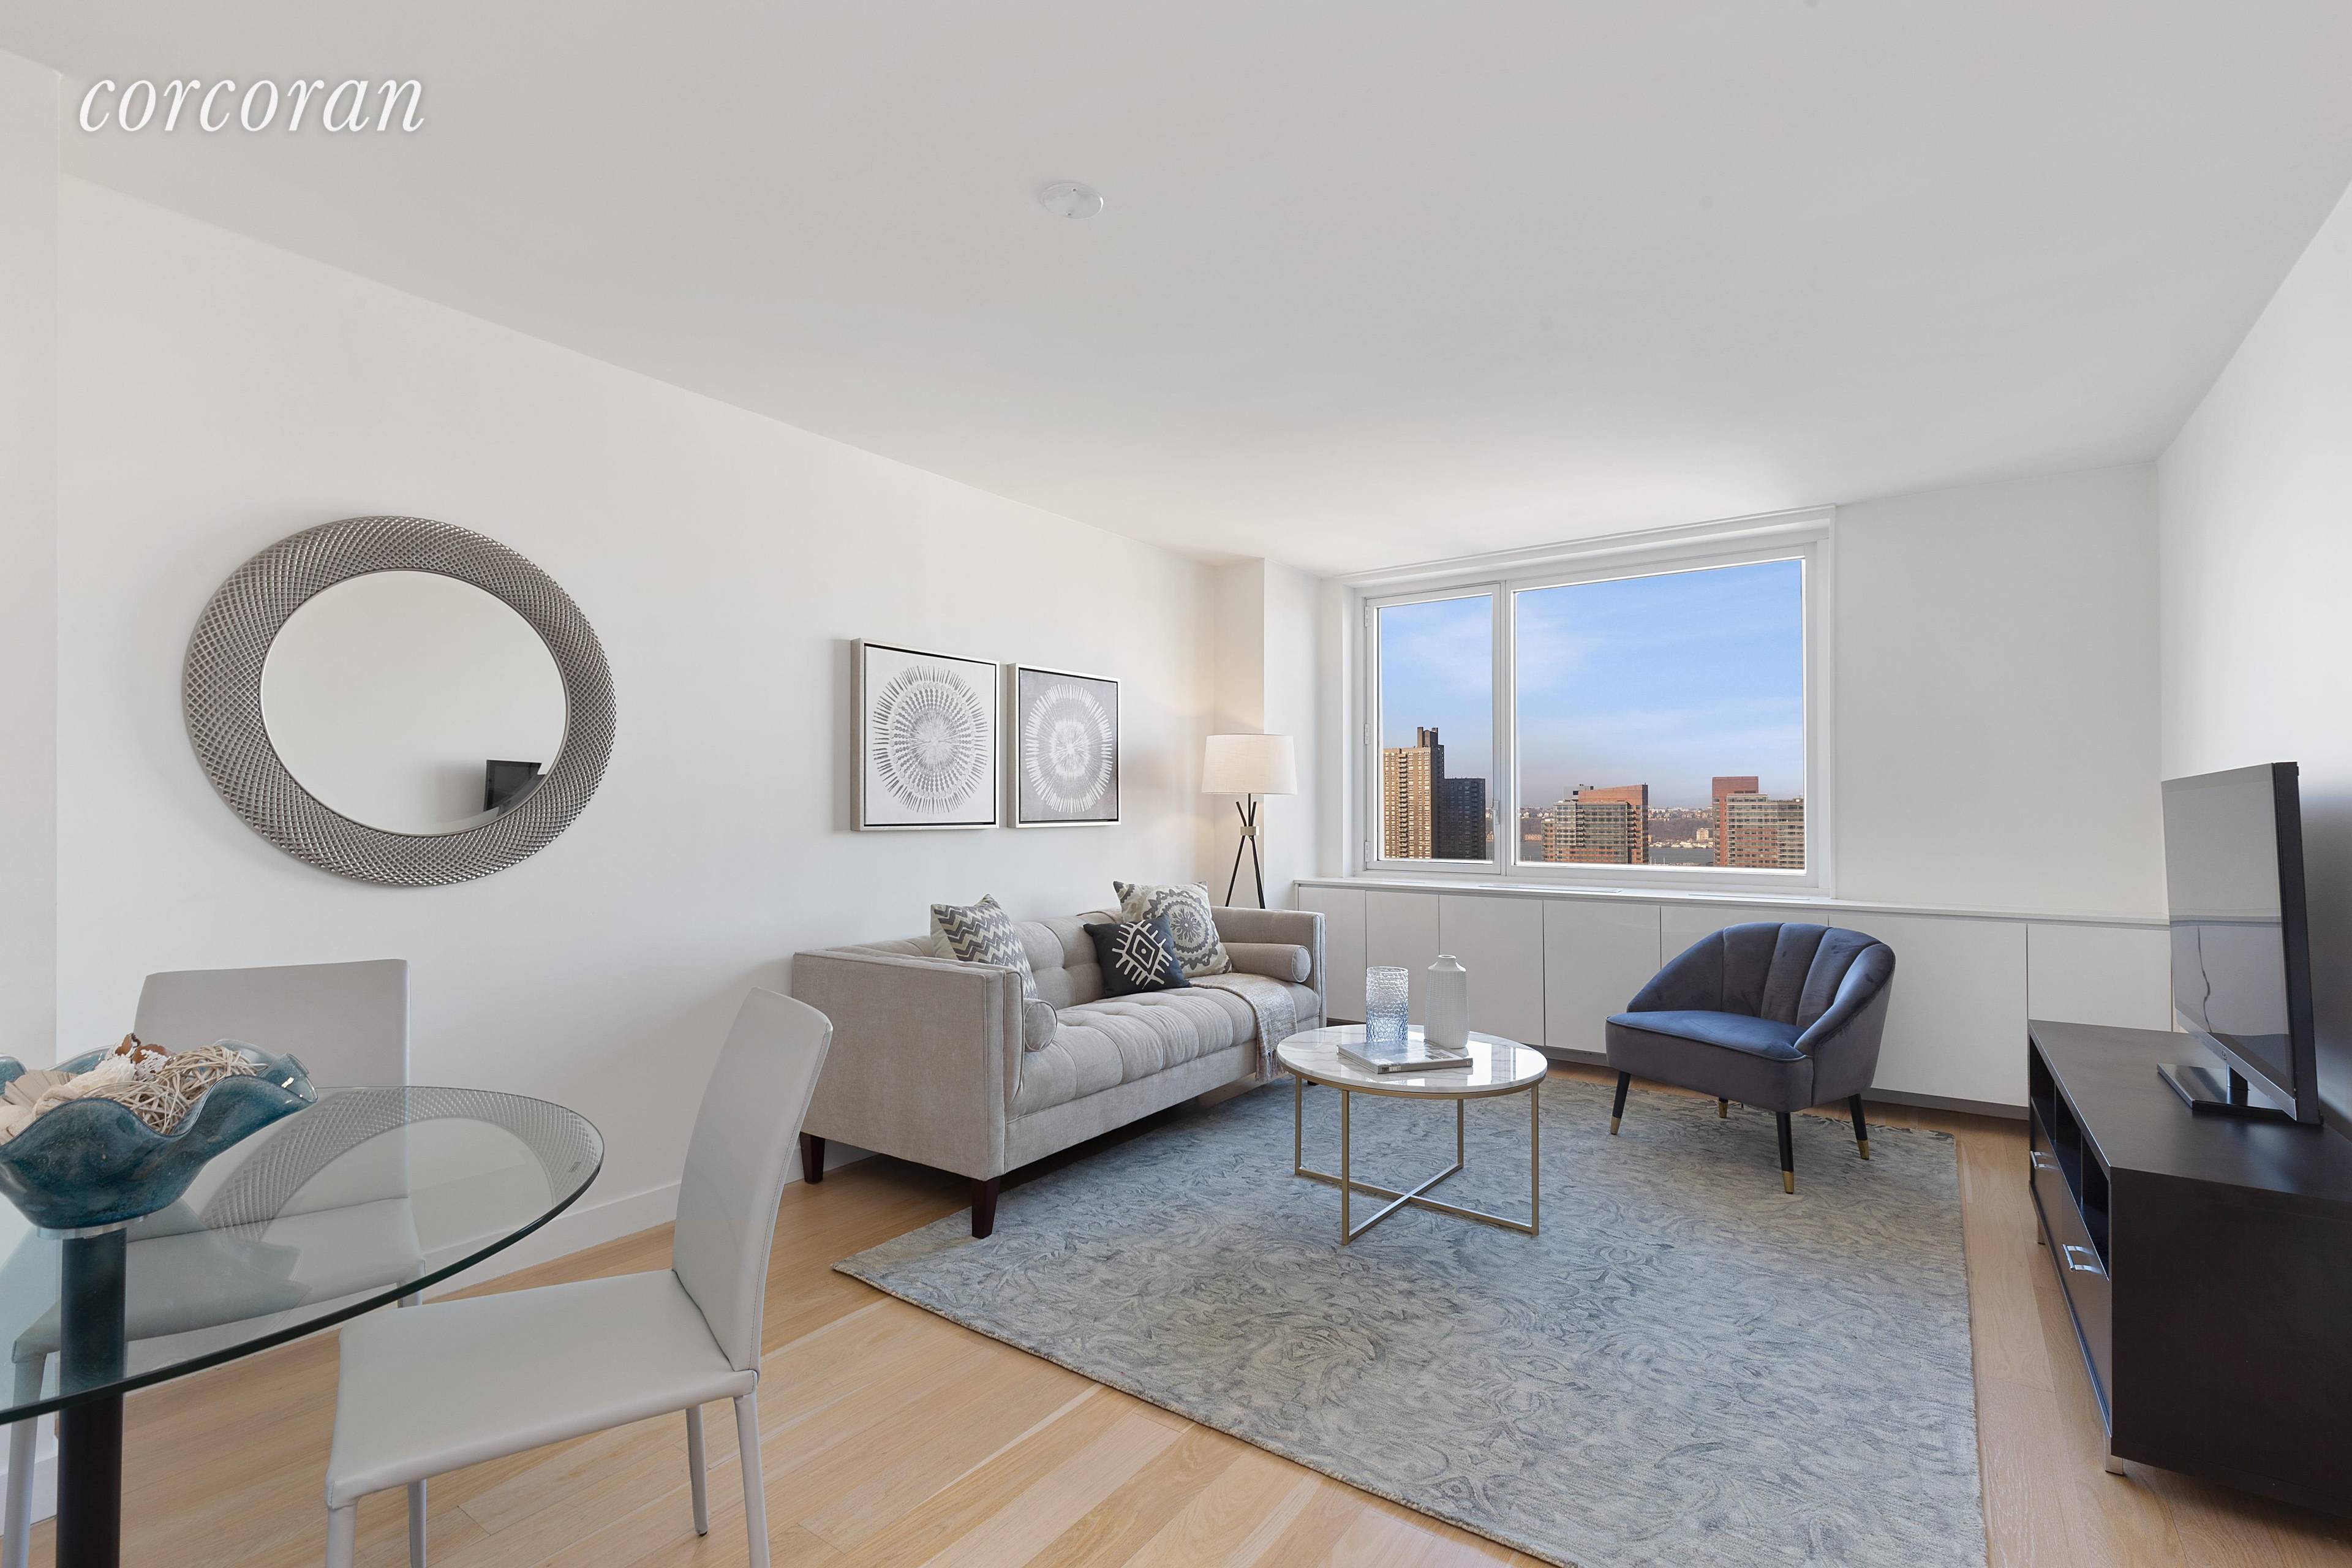 Located on the top floor of the luxurious condominium, 301 West 53rd Street, is an impeccably renovated 796 square foot two bedroom residence that faces west and has panoramic skyline ...